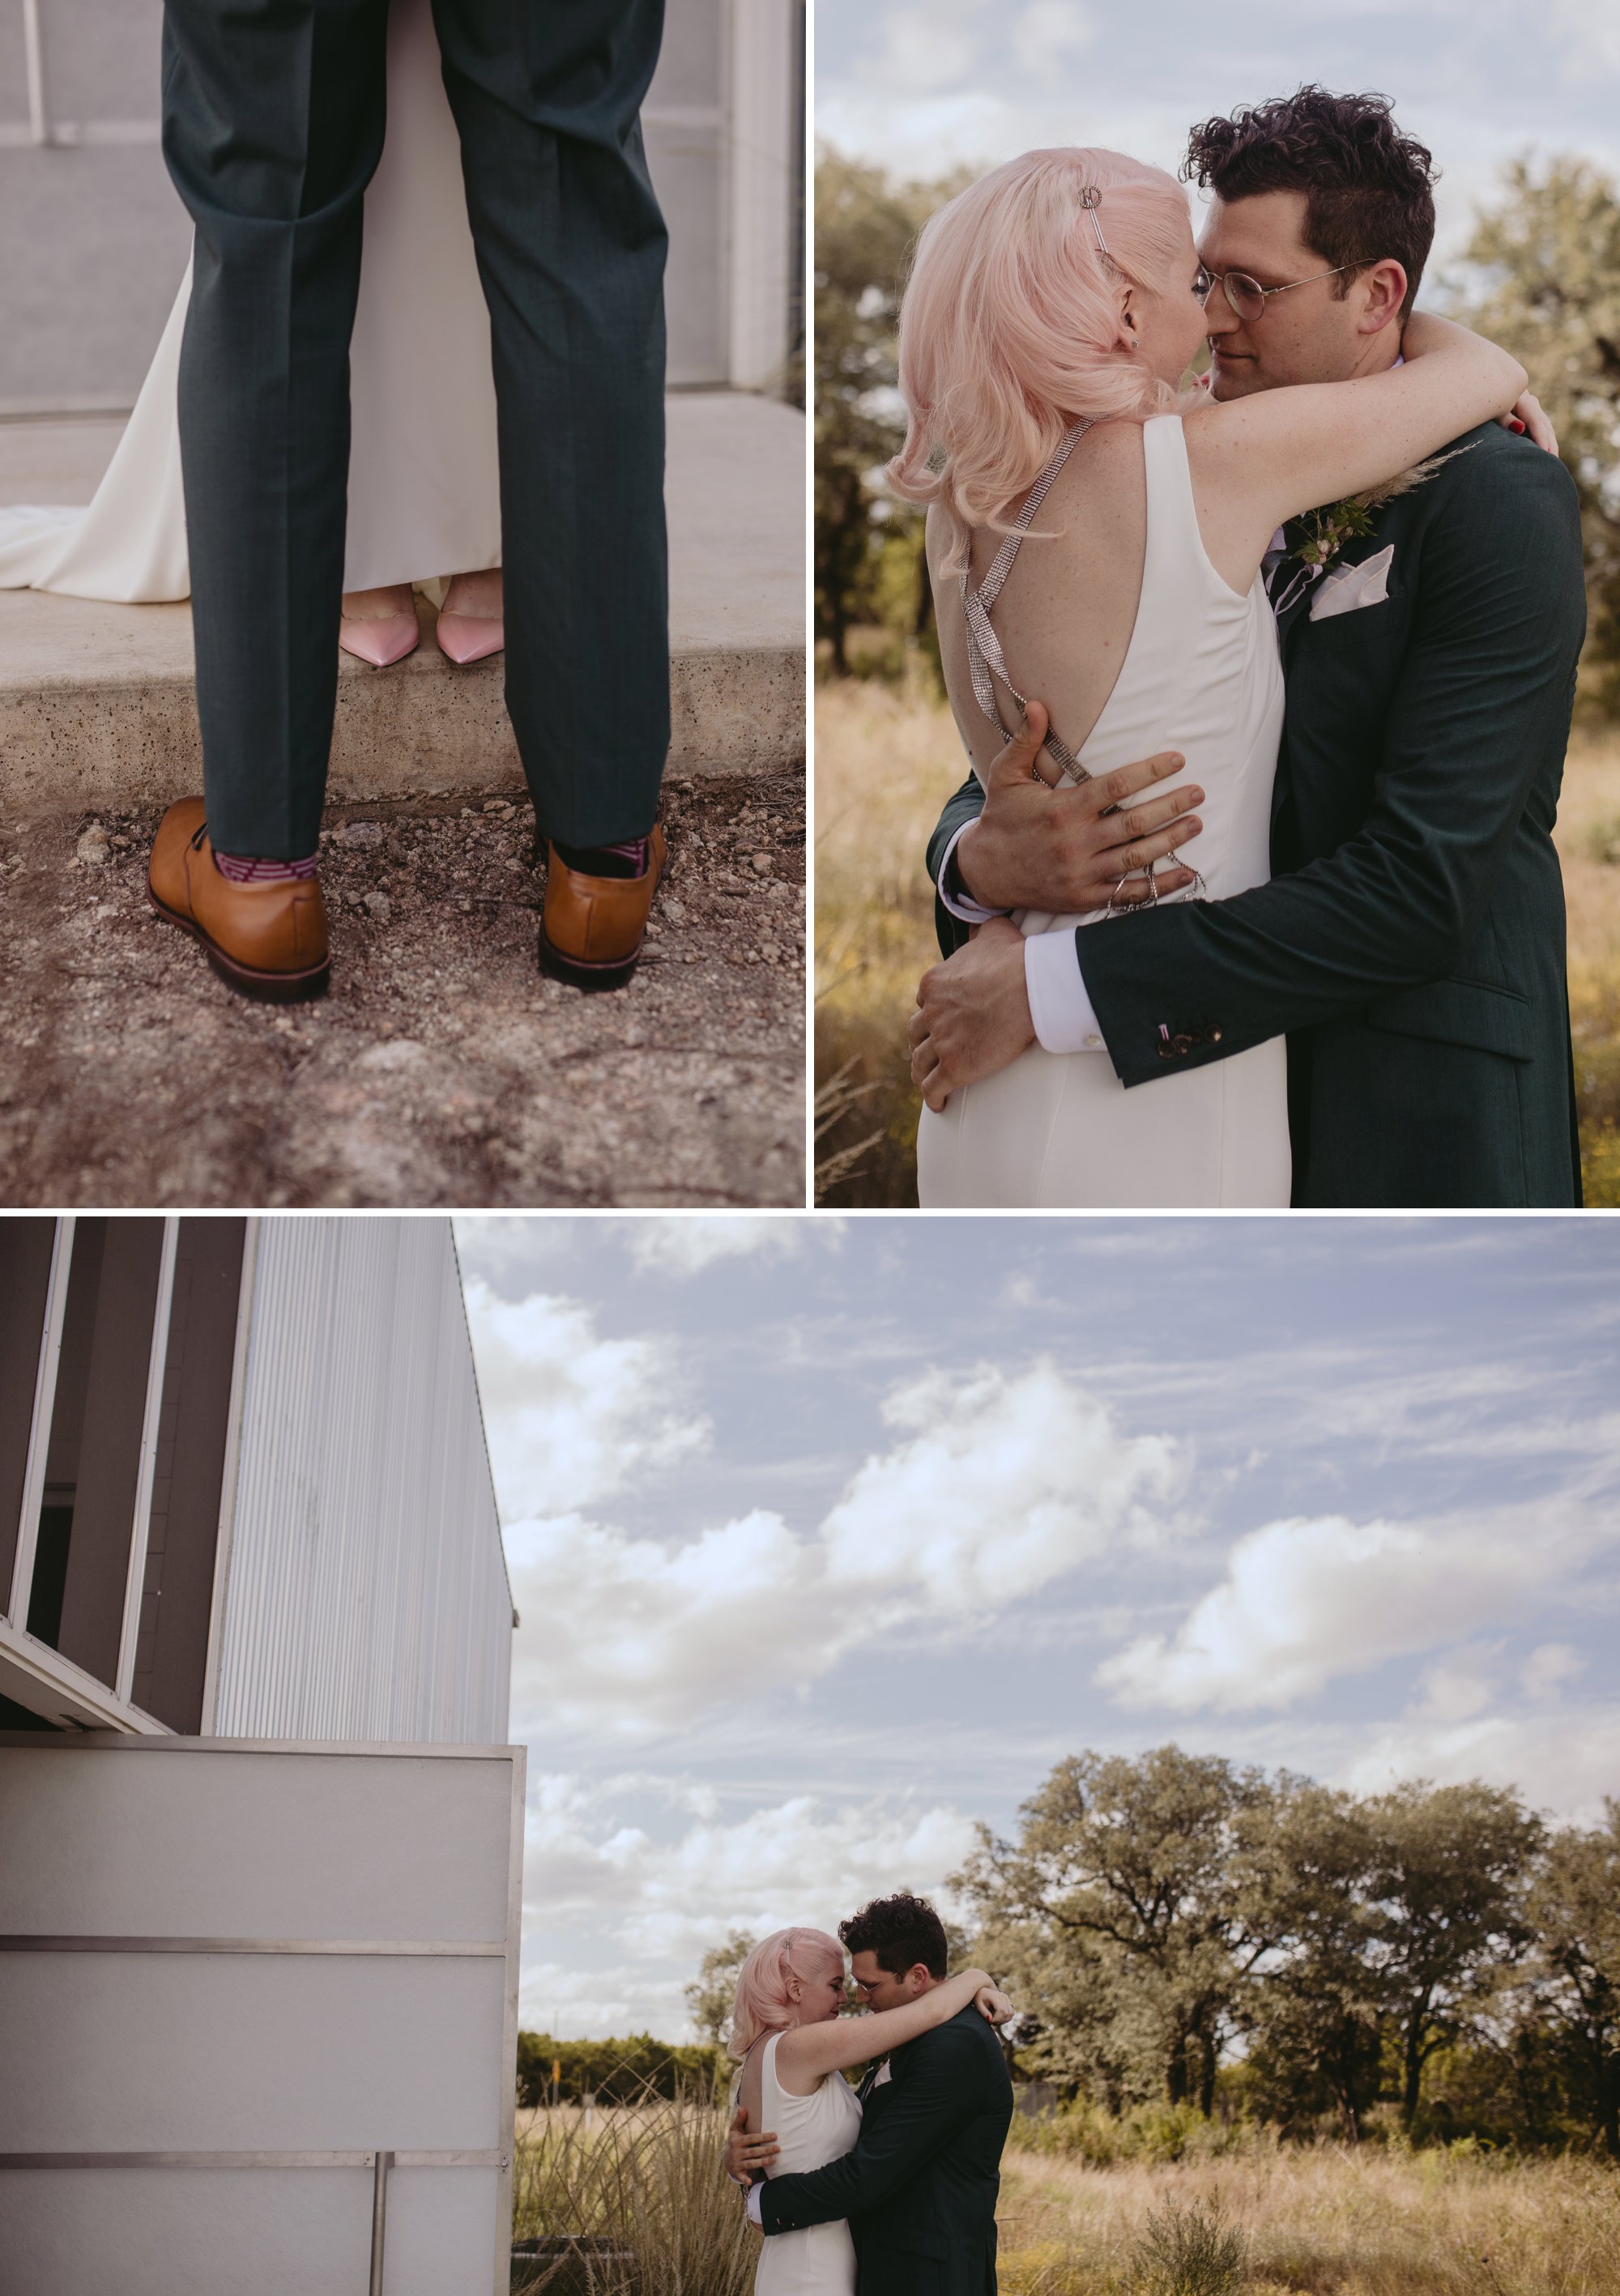 Bride with pink hair and groom in a purple suit prospect house wedding in austin tx with pastel decor and wild florals first look